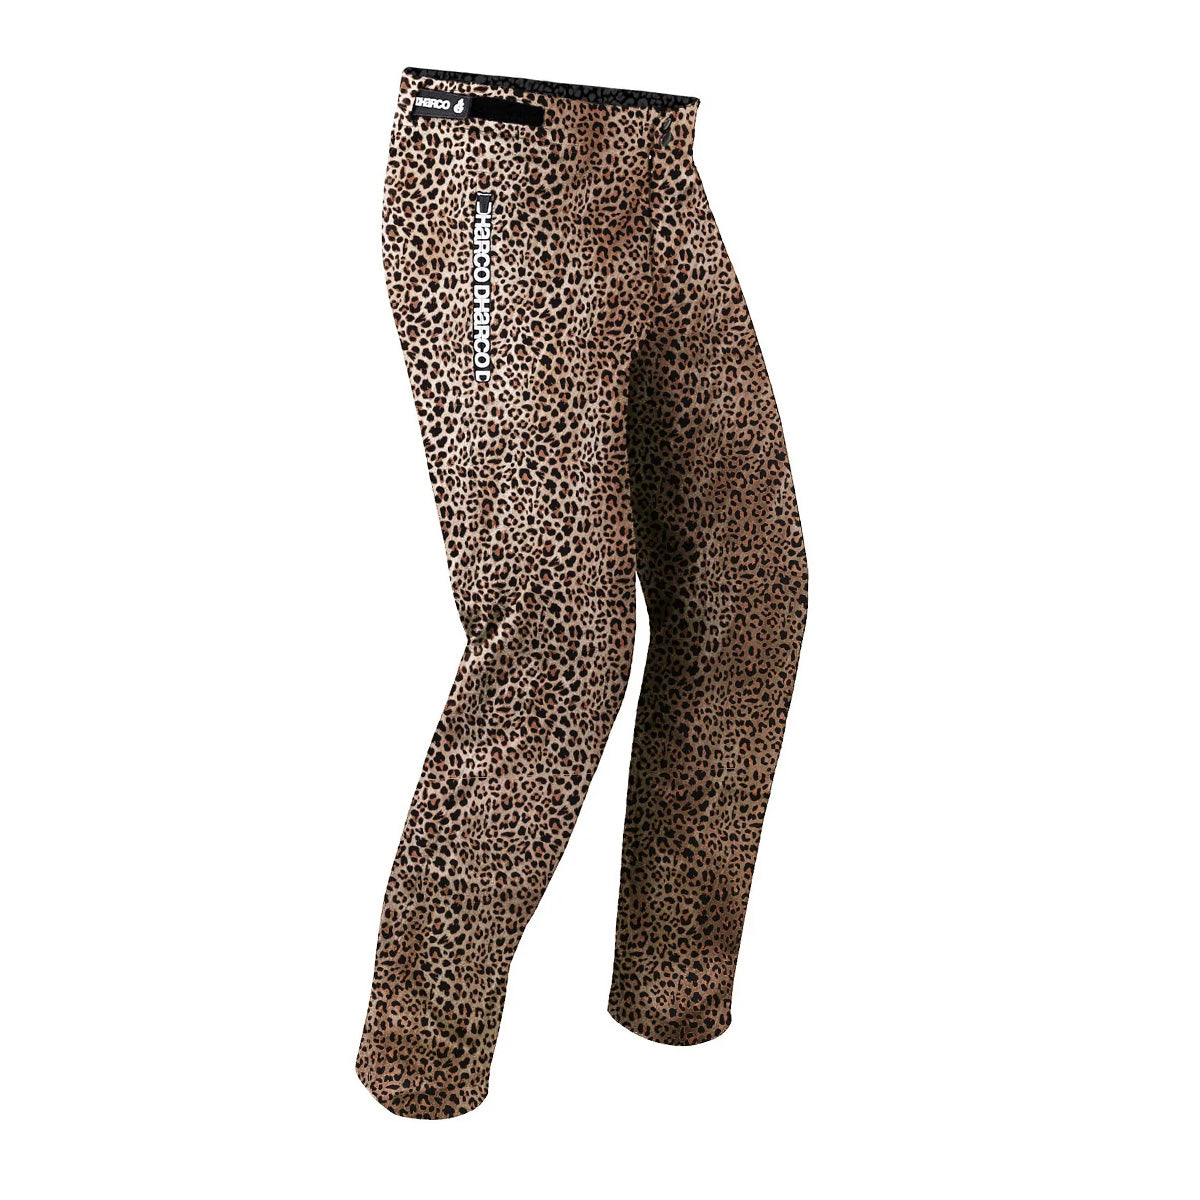 DHaRCO Youth Gravity Pants - Youth 2XL - Leopard